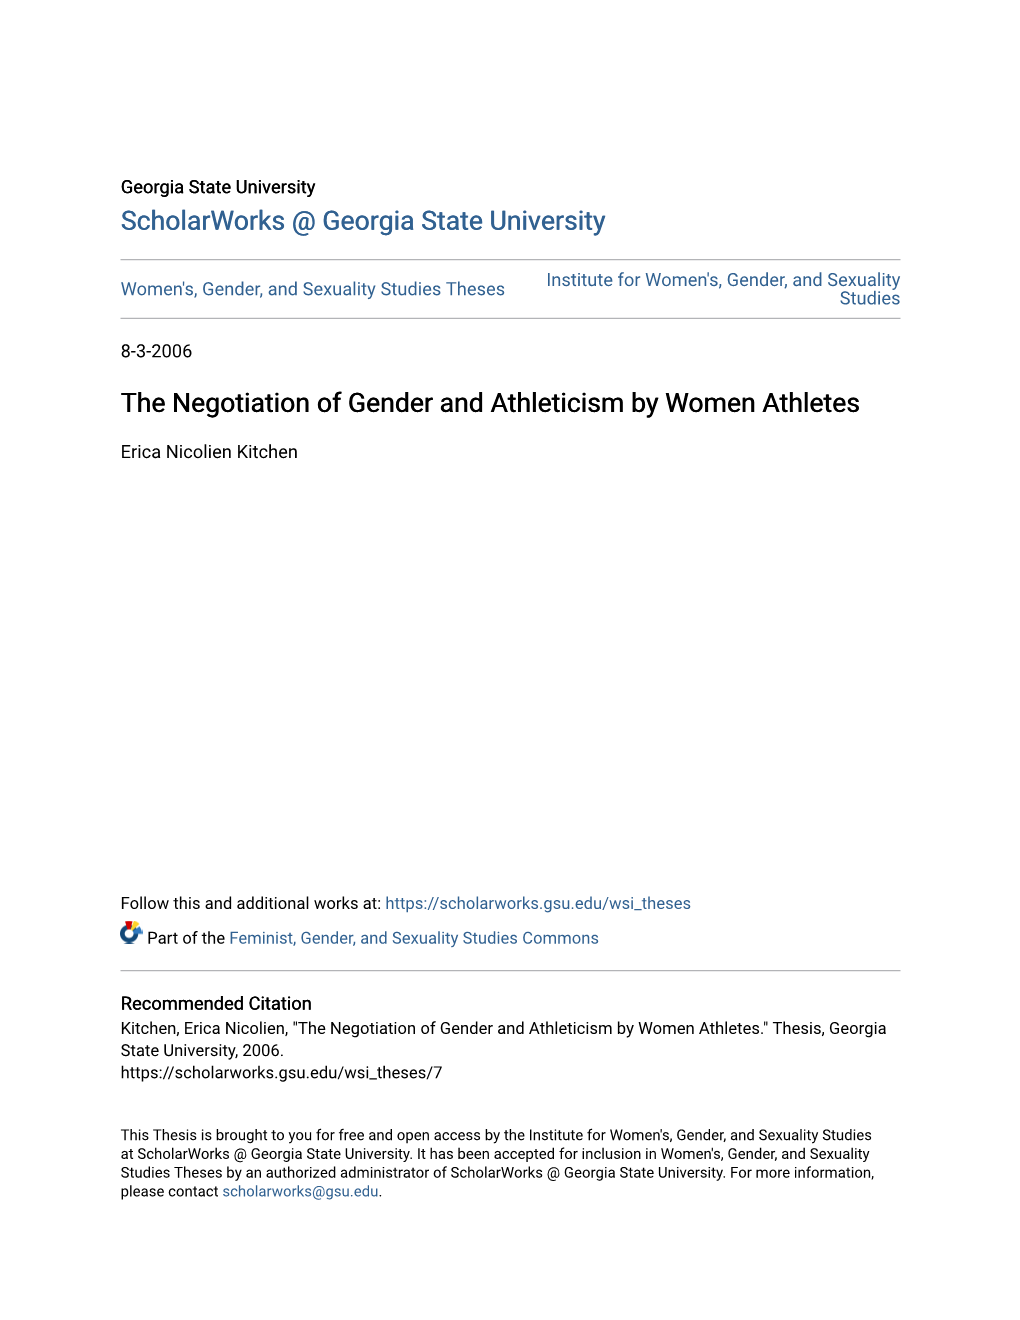 The Negotiation of Gender and Athleticism by Women Athletes